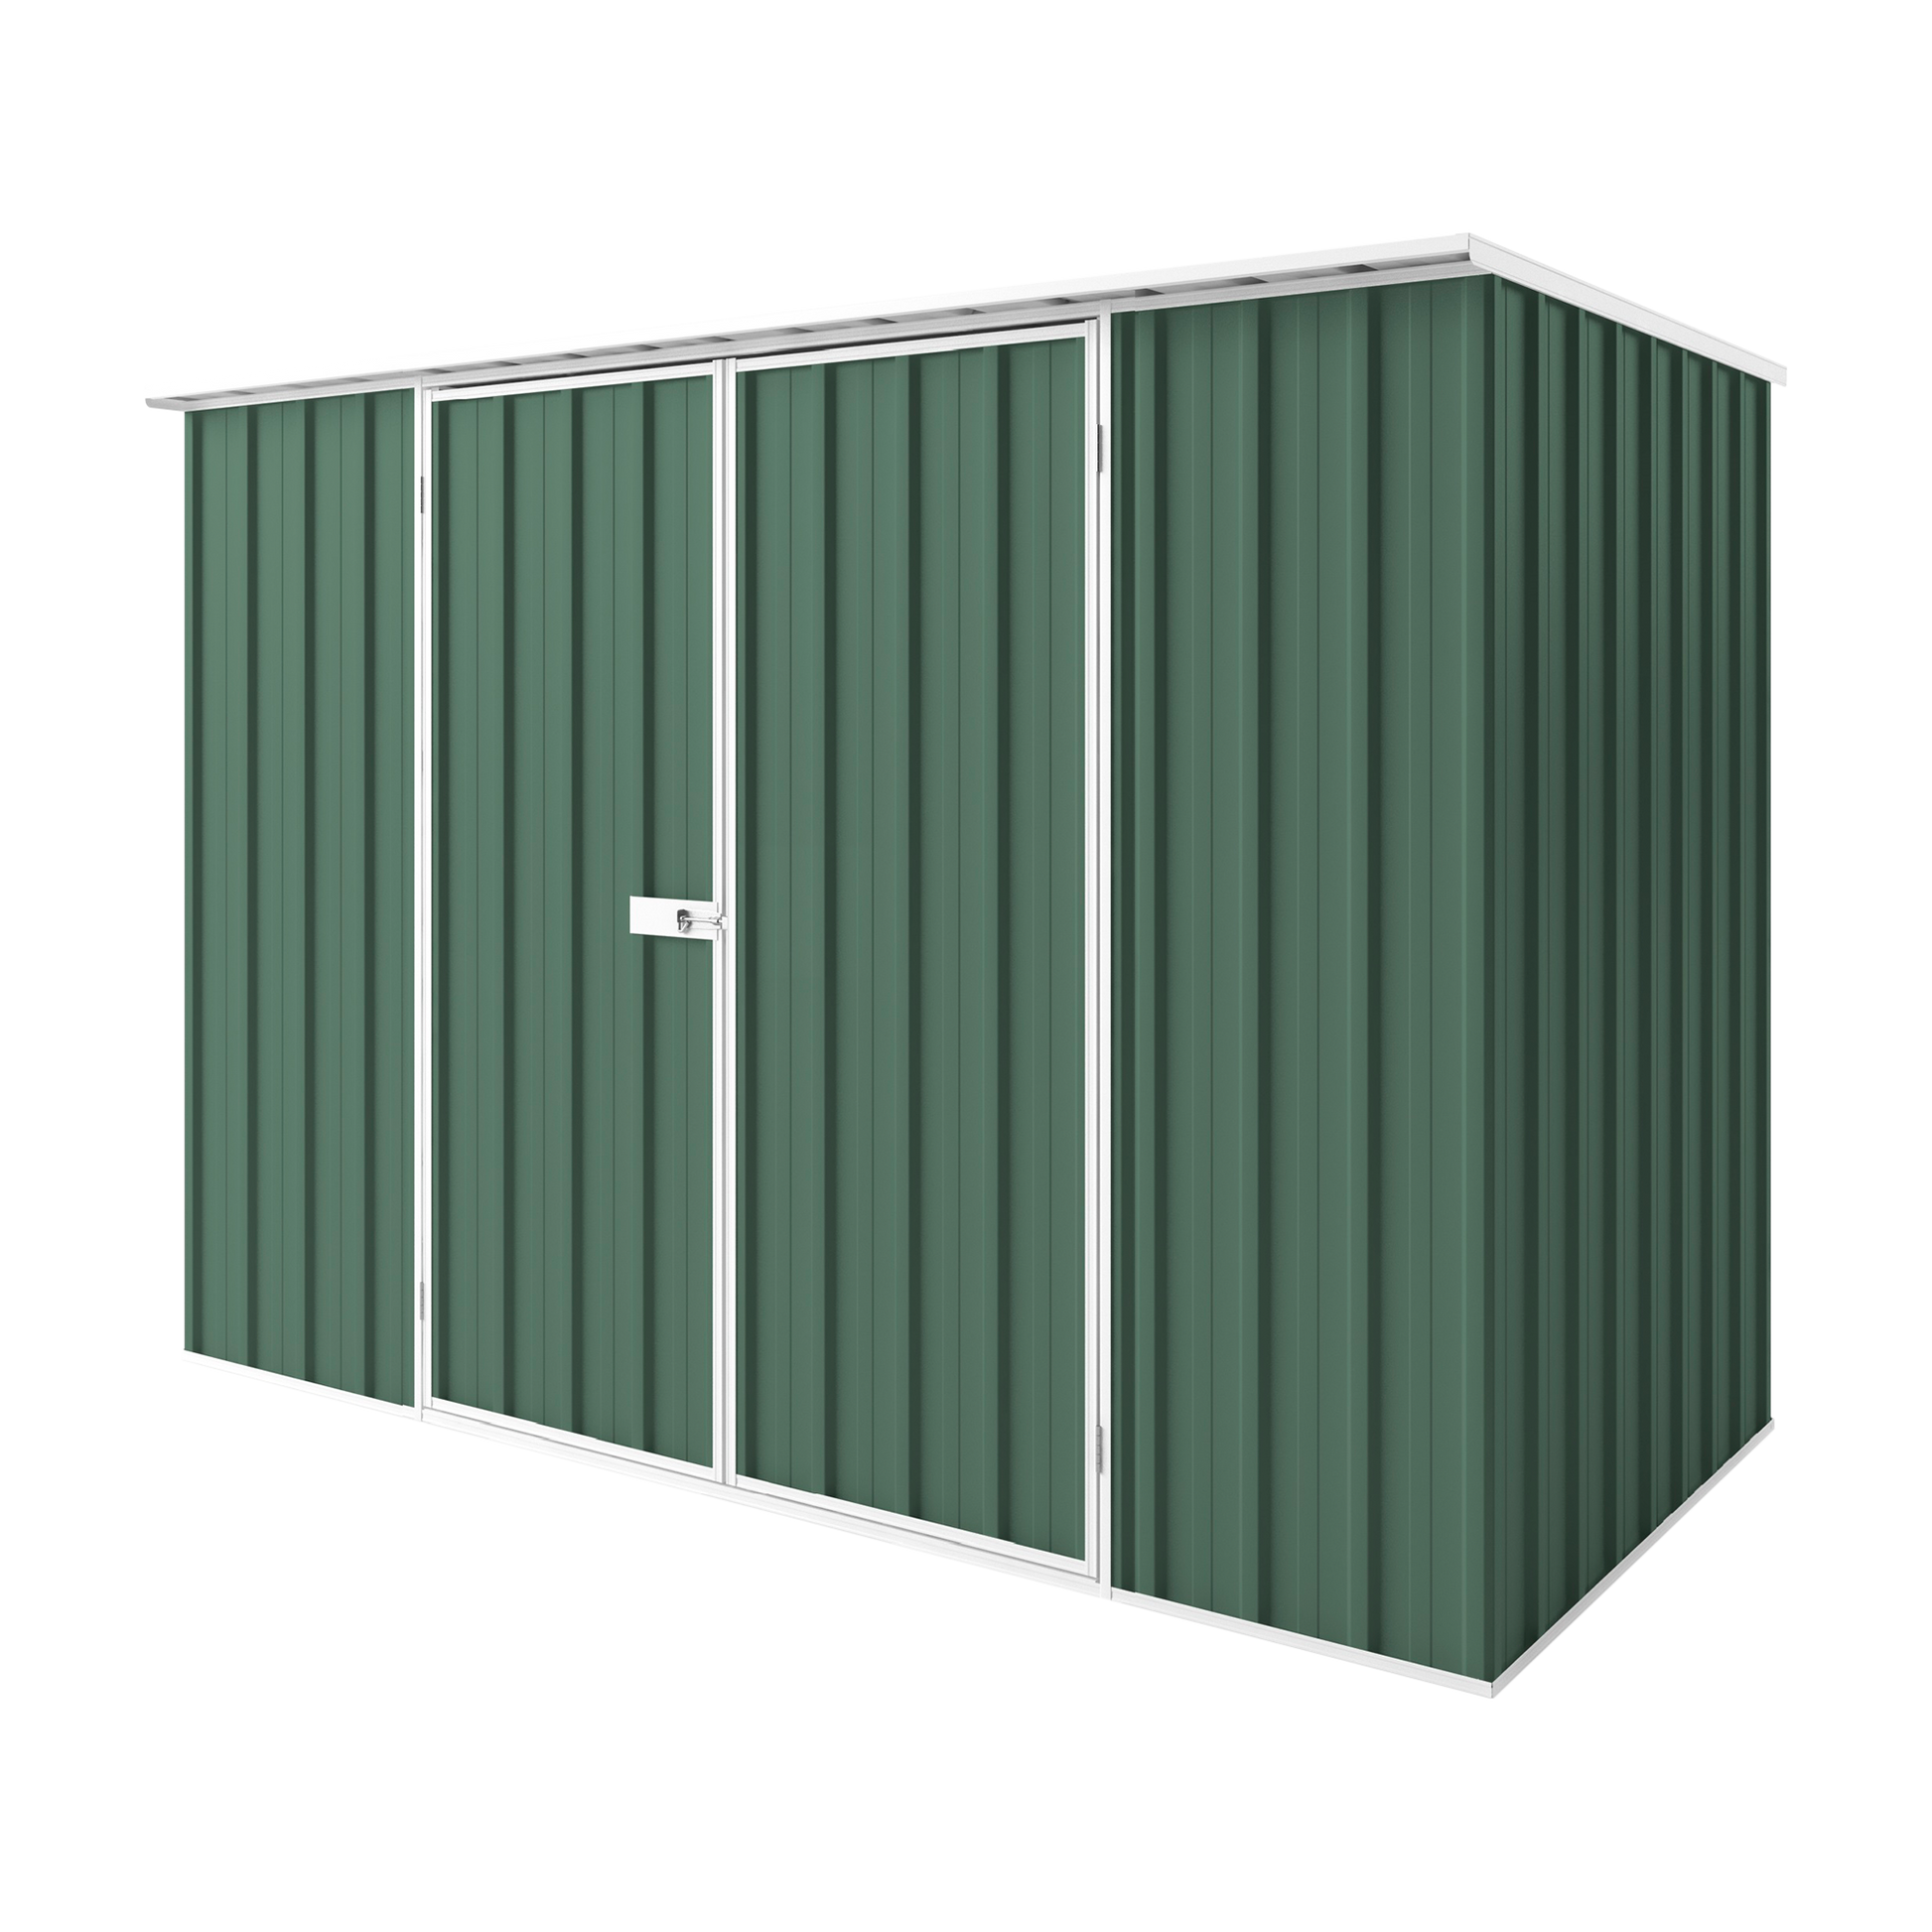 3m x 1.5m Flat Roof Garden Shed - EasyShed